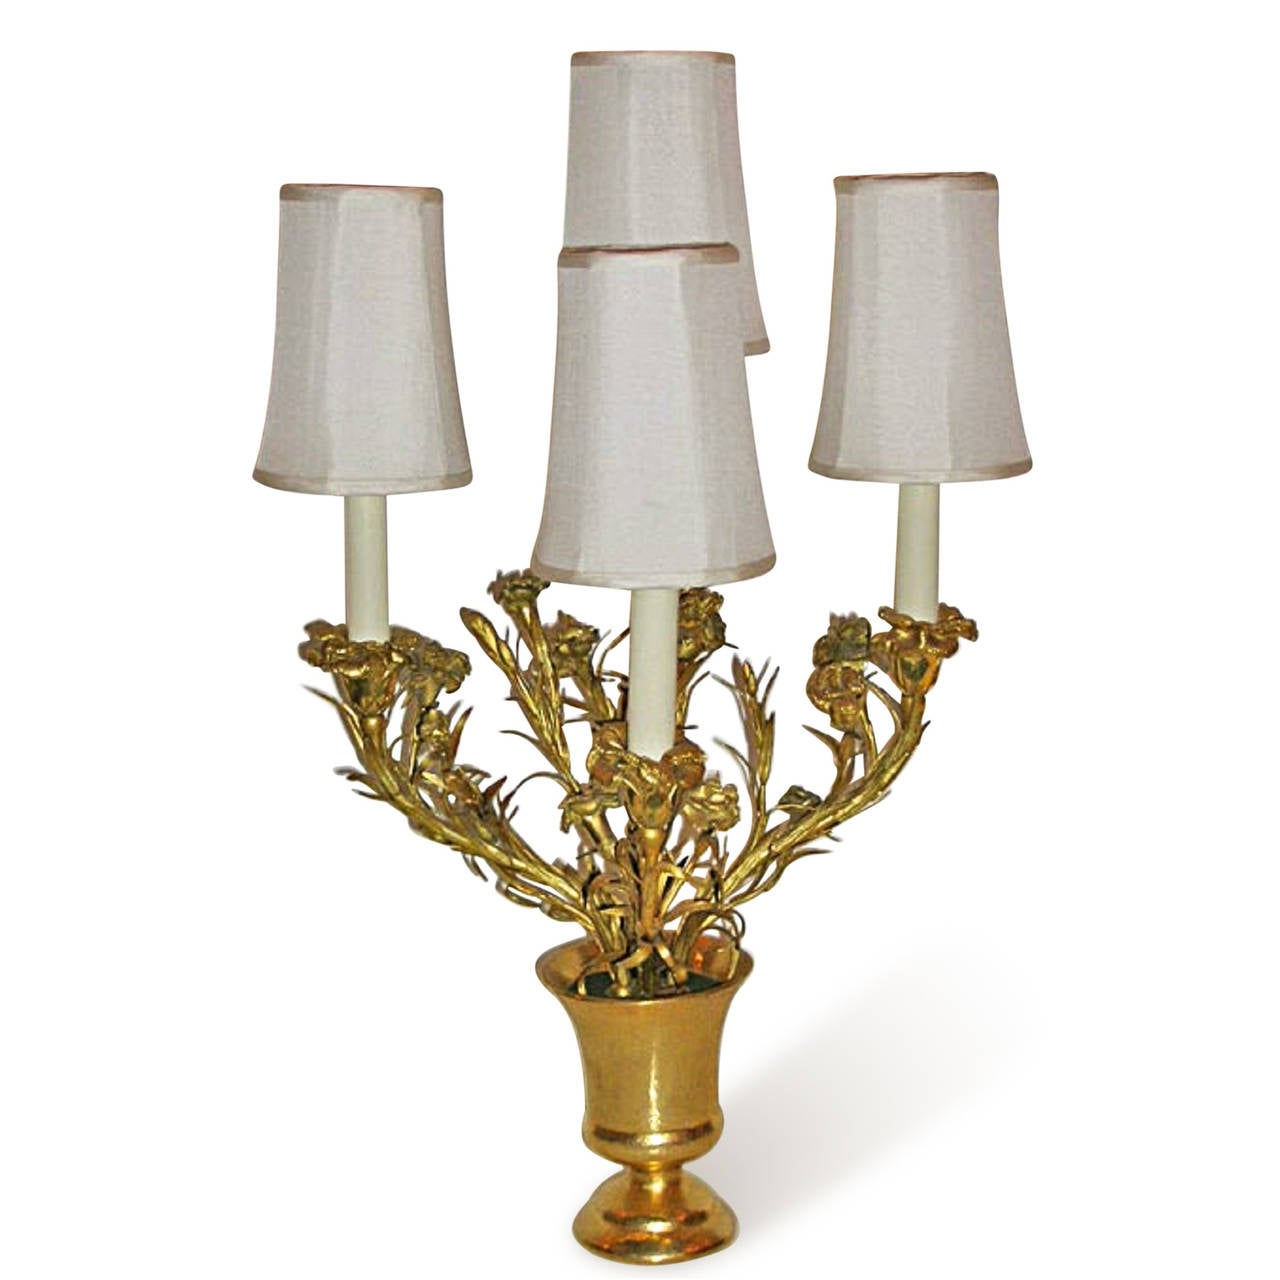 Pair of four-arm gilt bronze flower and pot form lamps, French late 1940s. In custom silk shades. Measures: Height 24.25 in, width 14.5 in, depth 8.5 in.